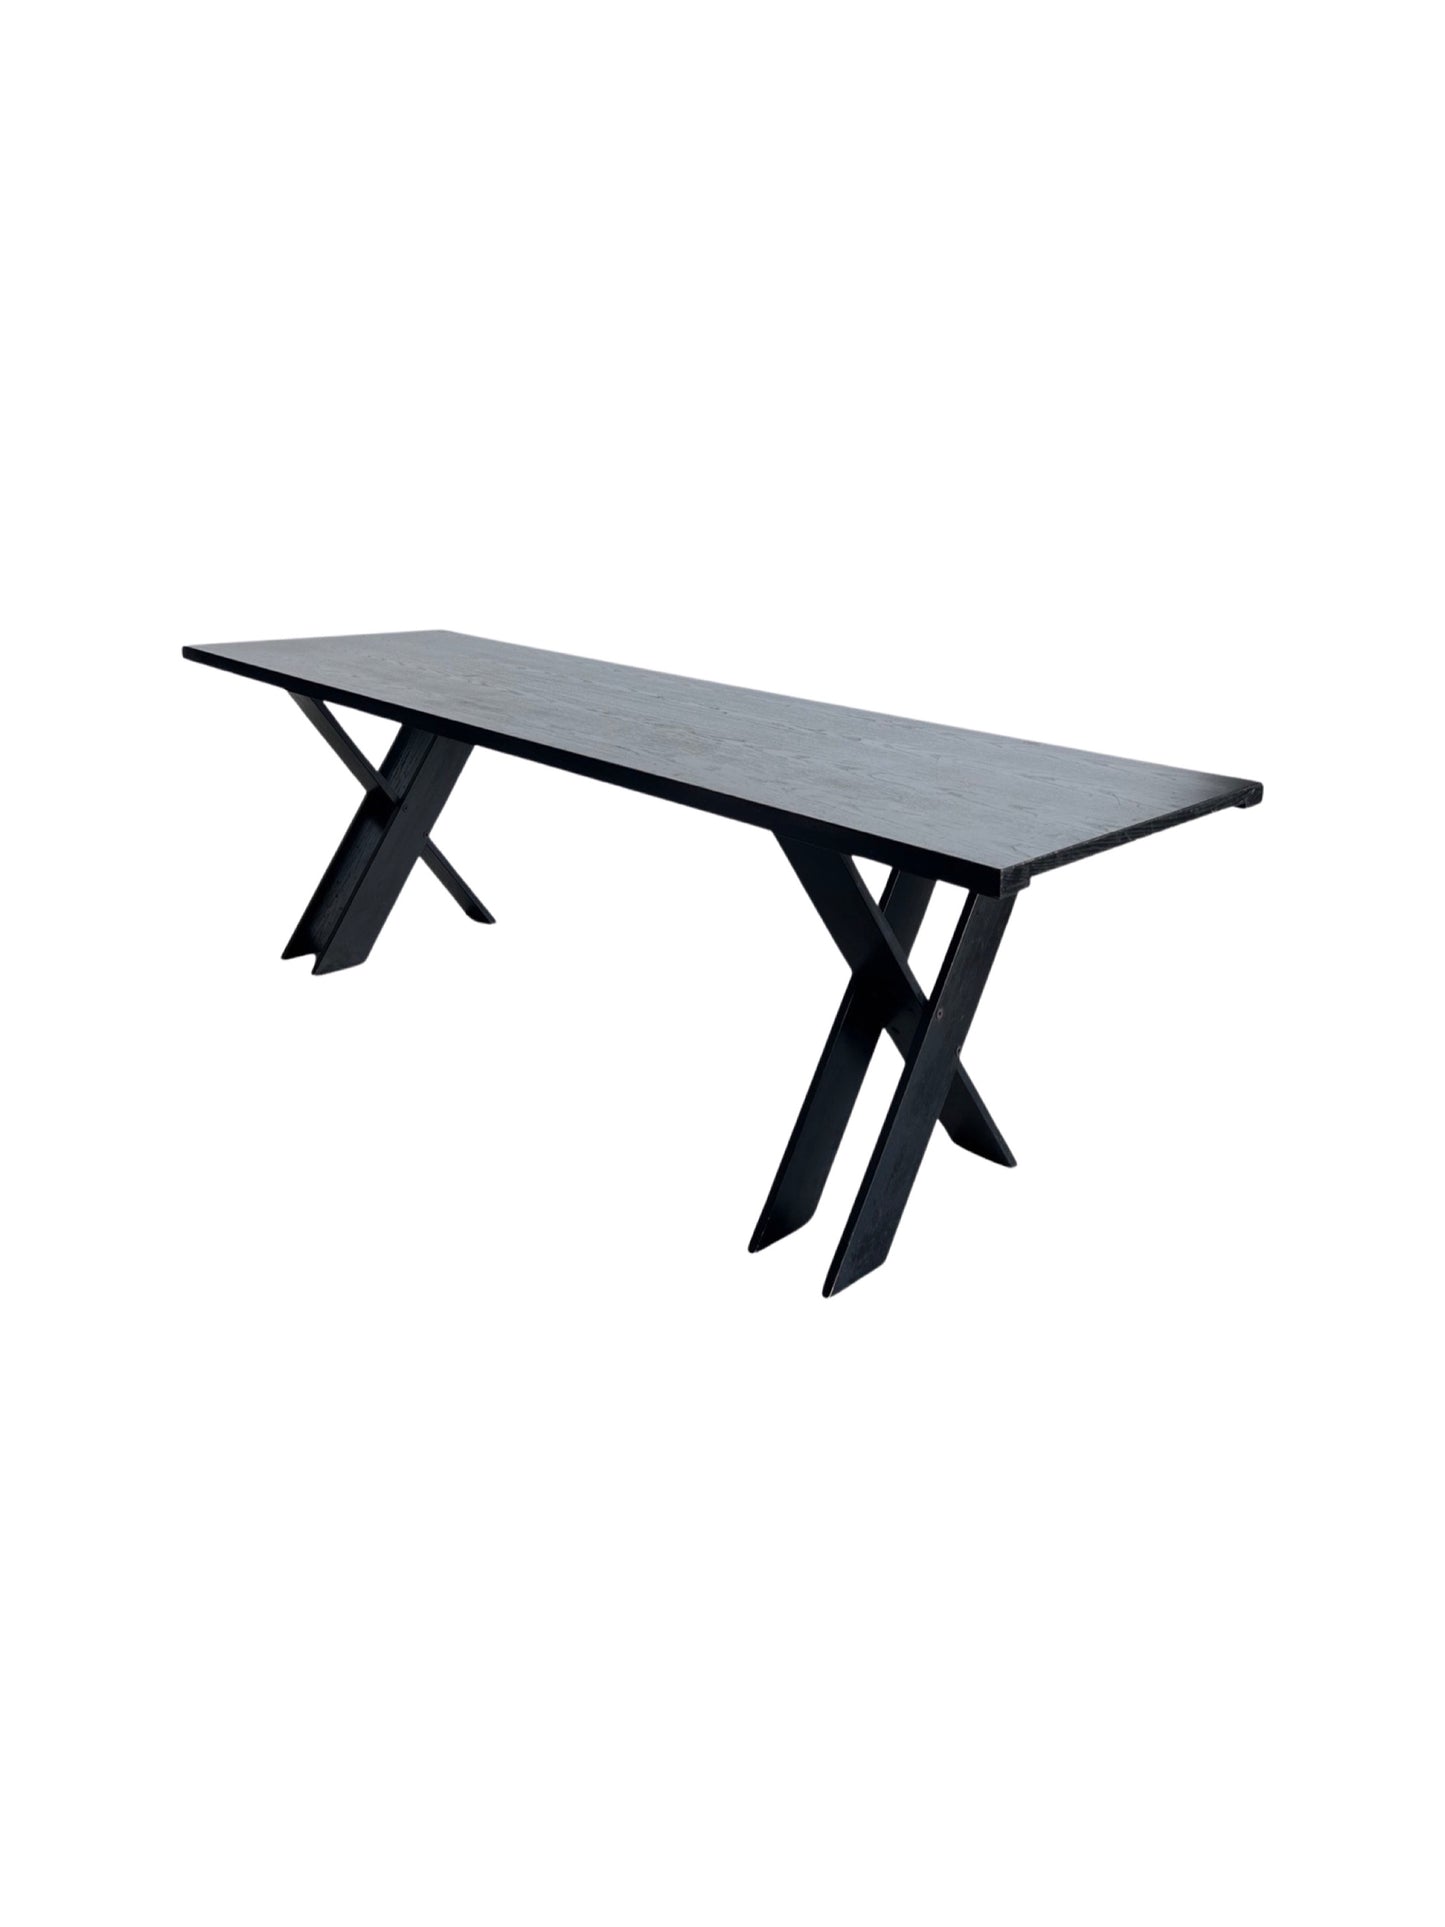 "TL 58" by Marco Zanuso for Poggi, Black Timber Dining Table, 1970s